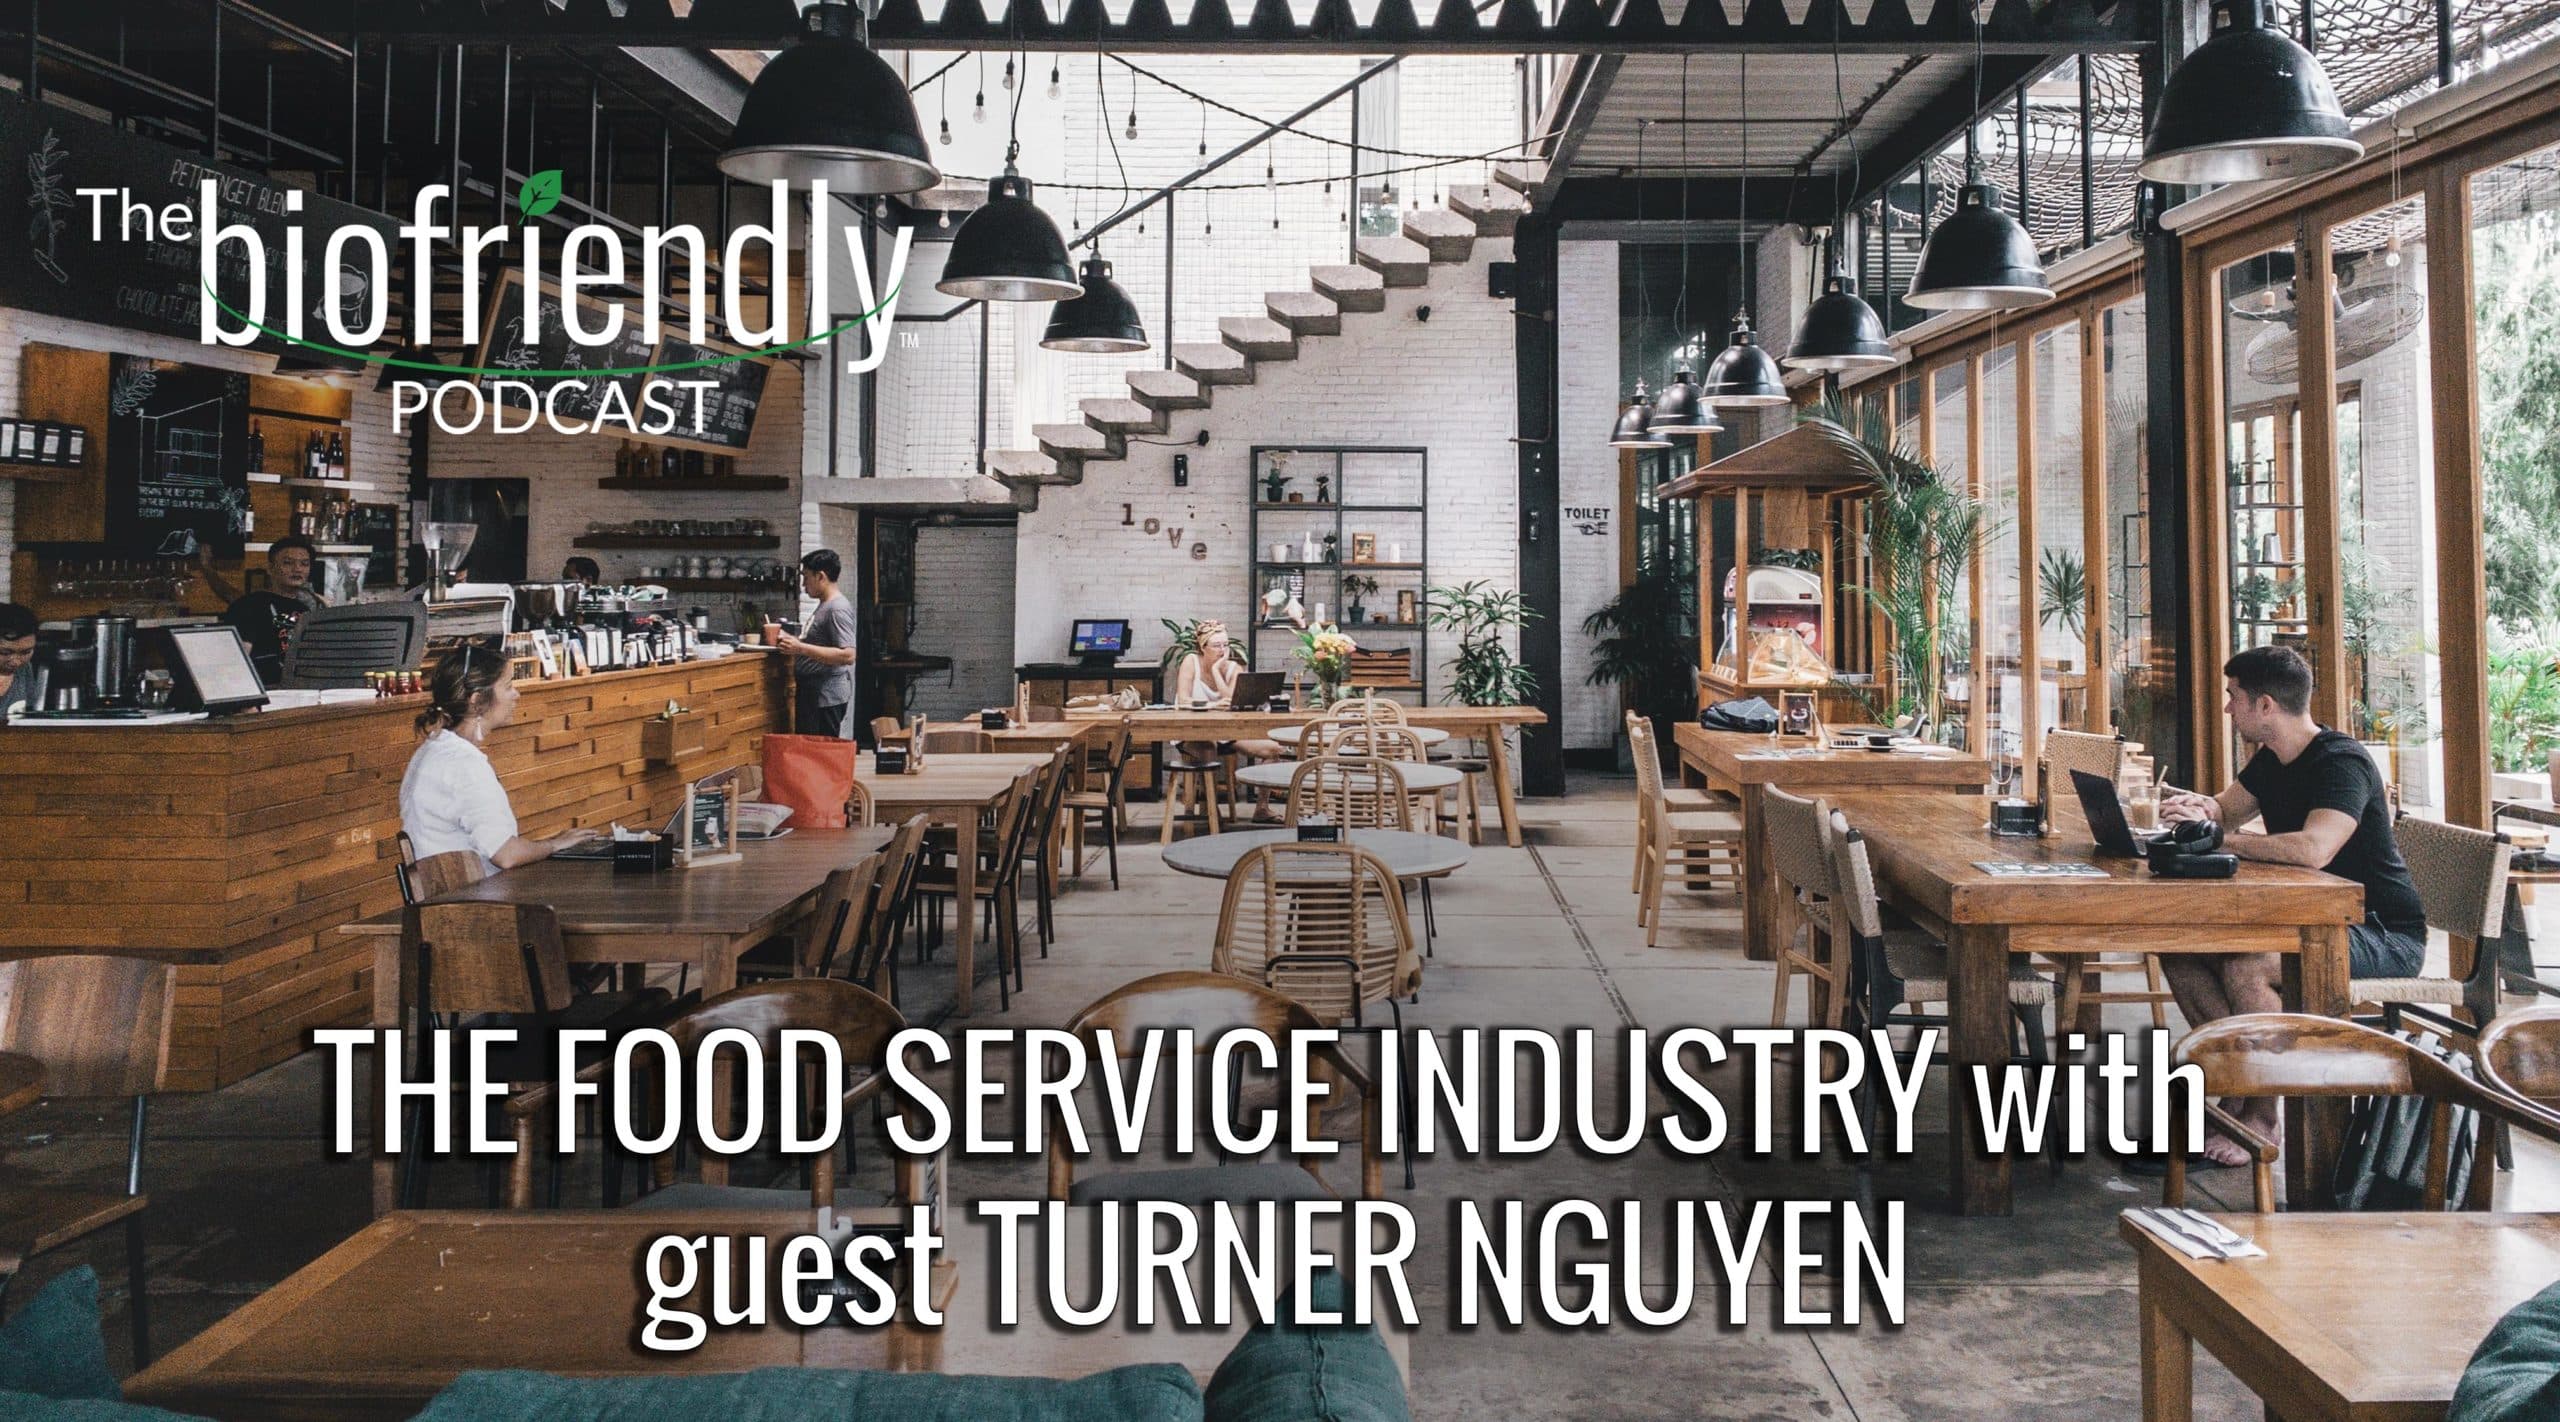 The Biofriendly Podcast - Episode 60 - The Food Service Industry with guest Turner Nguyen